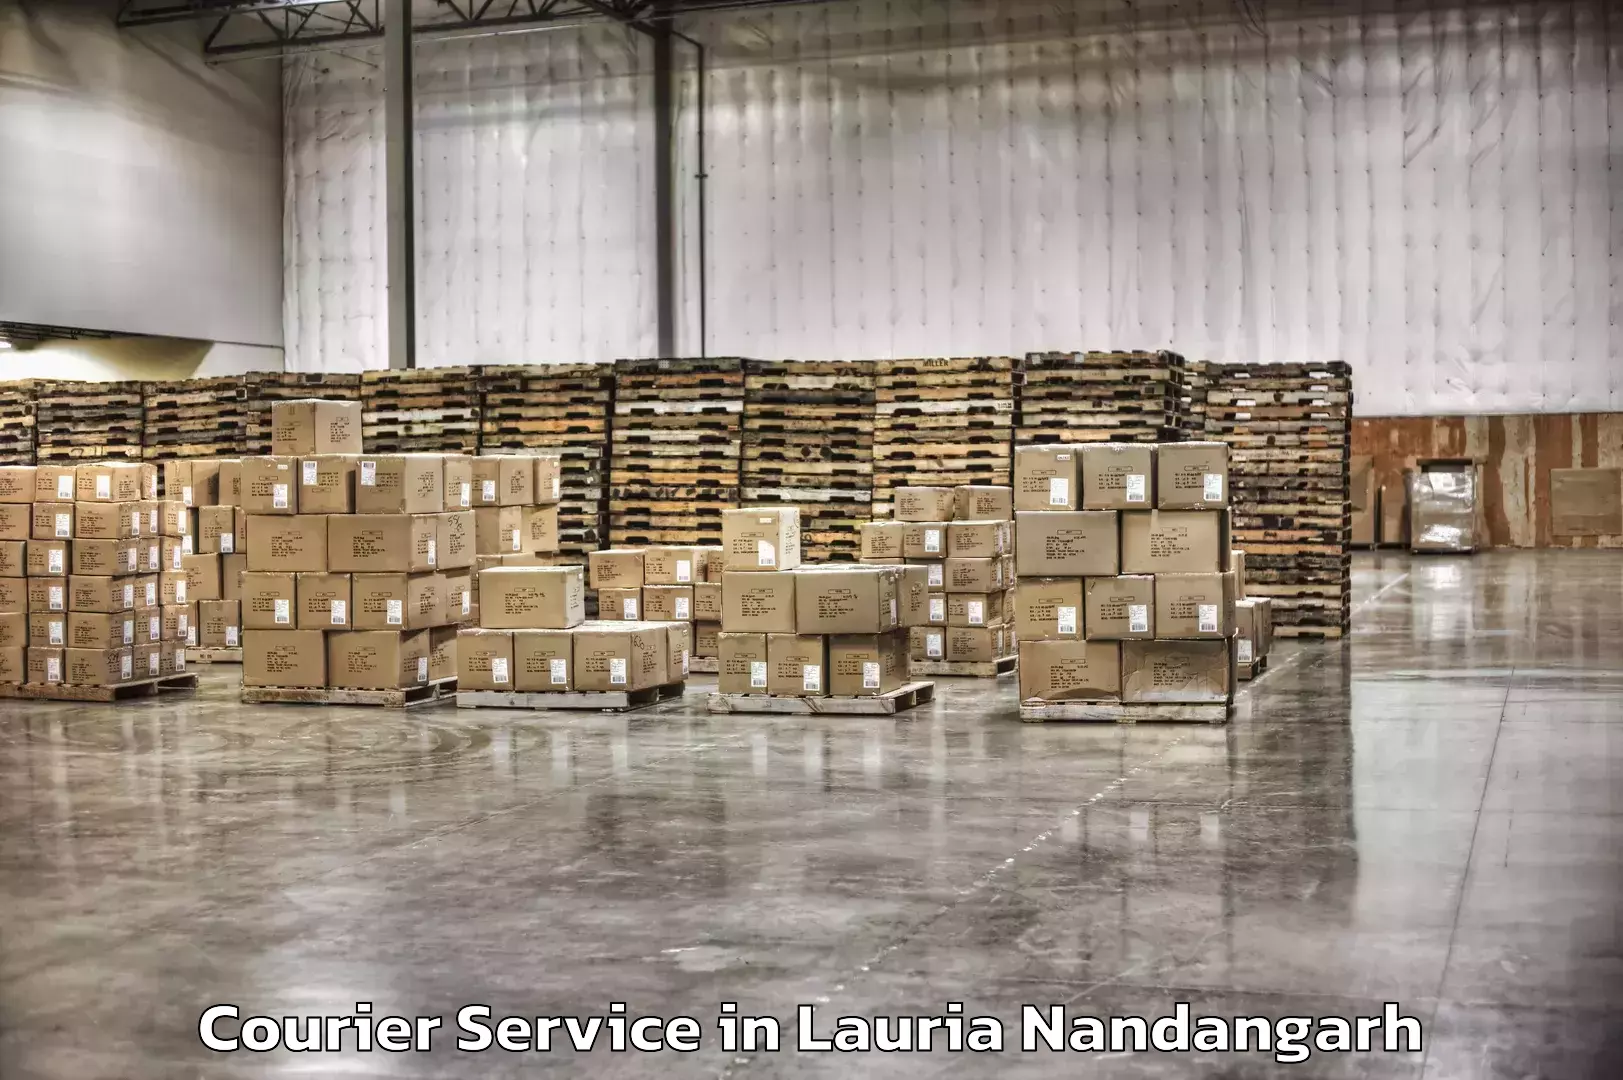 Express delivery solutions in Lauria Nandangarh